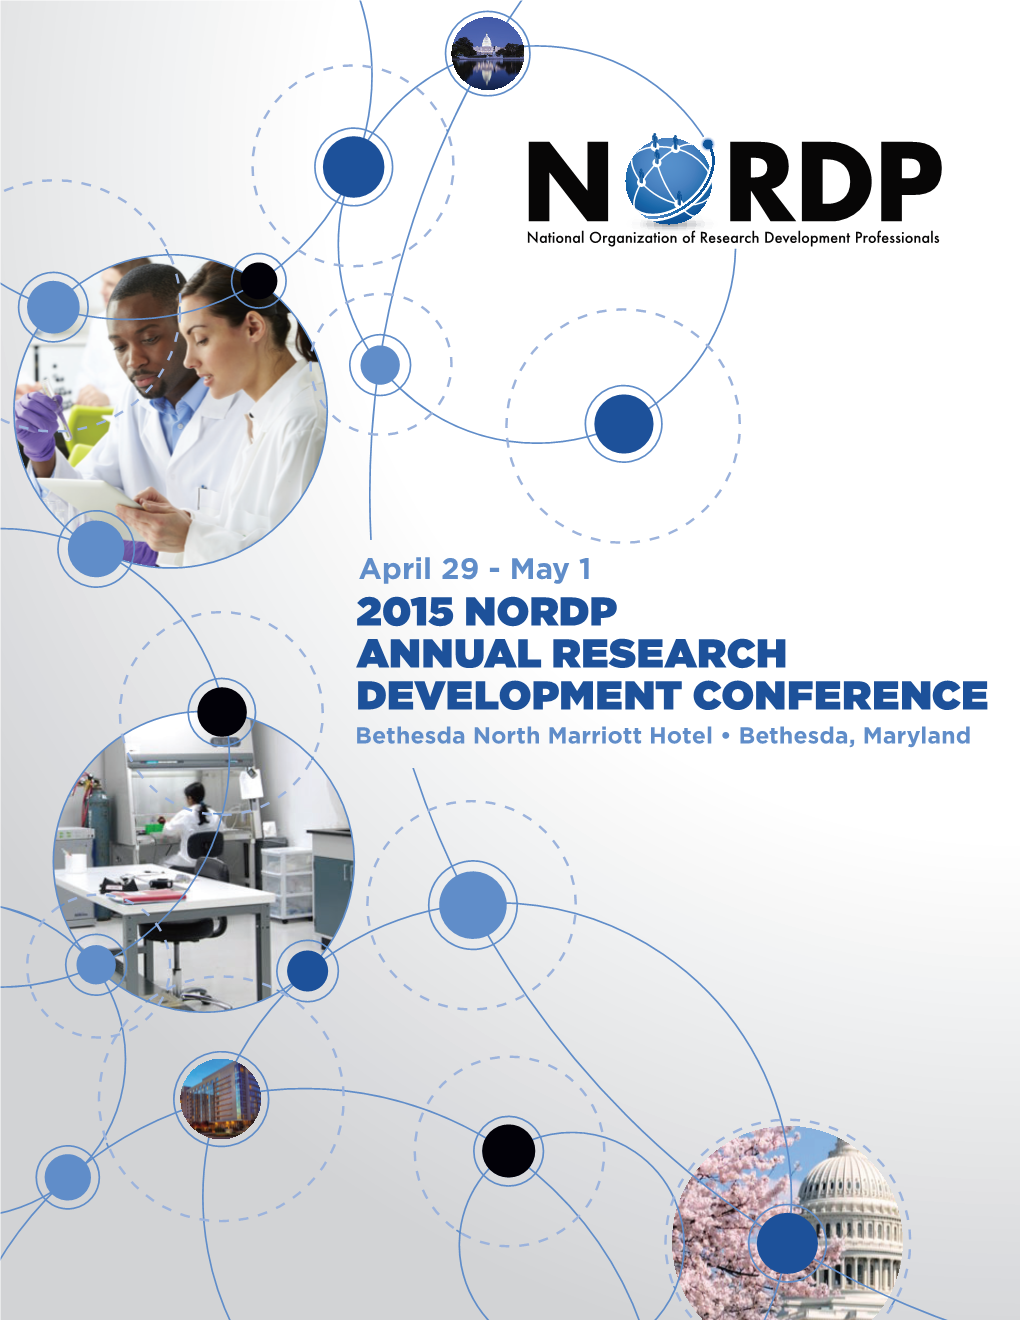 2015 NORDP ANNUAL RESEARCH DEVELOPMENT CONFERENCE Bethesda North Marriott Hotel • Bethesda, Maryland Table of Contents Schedule At-A-Glance